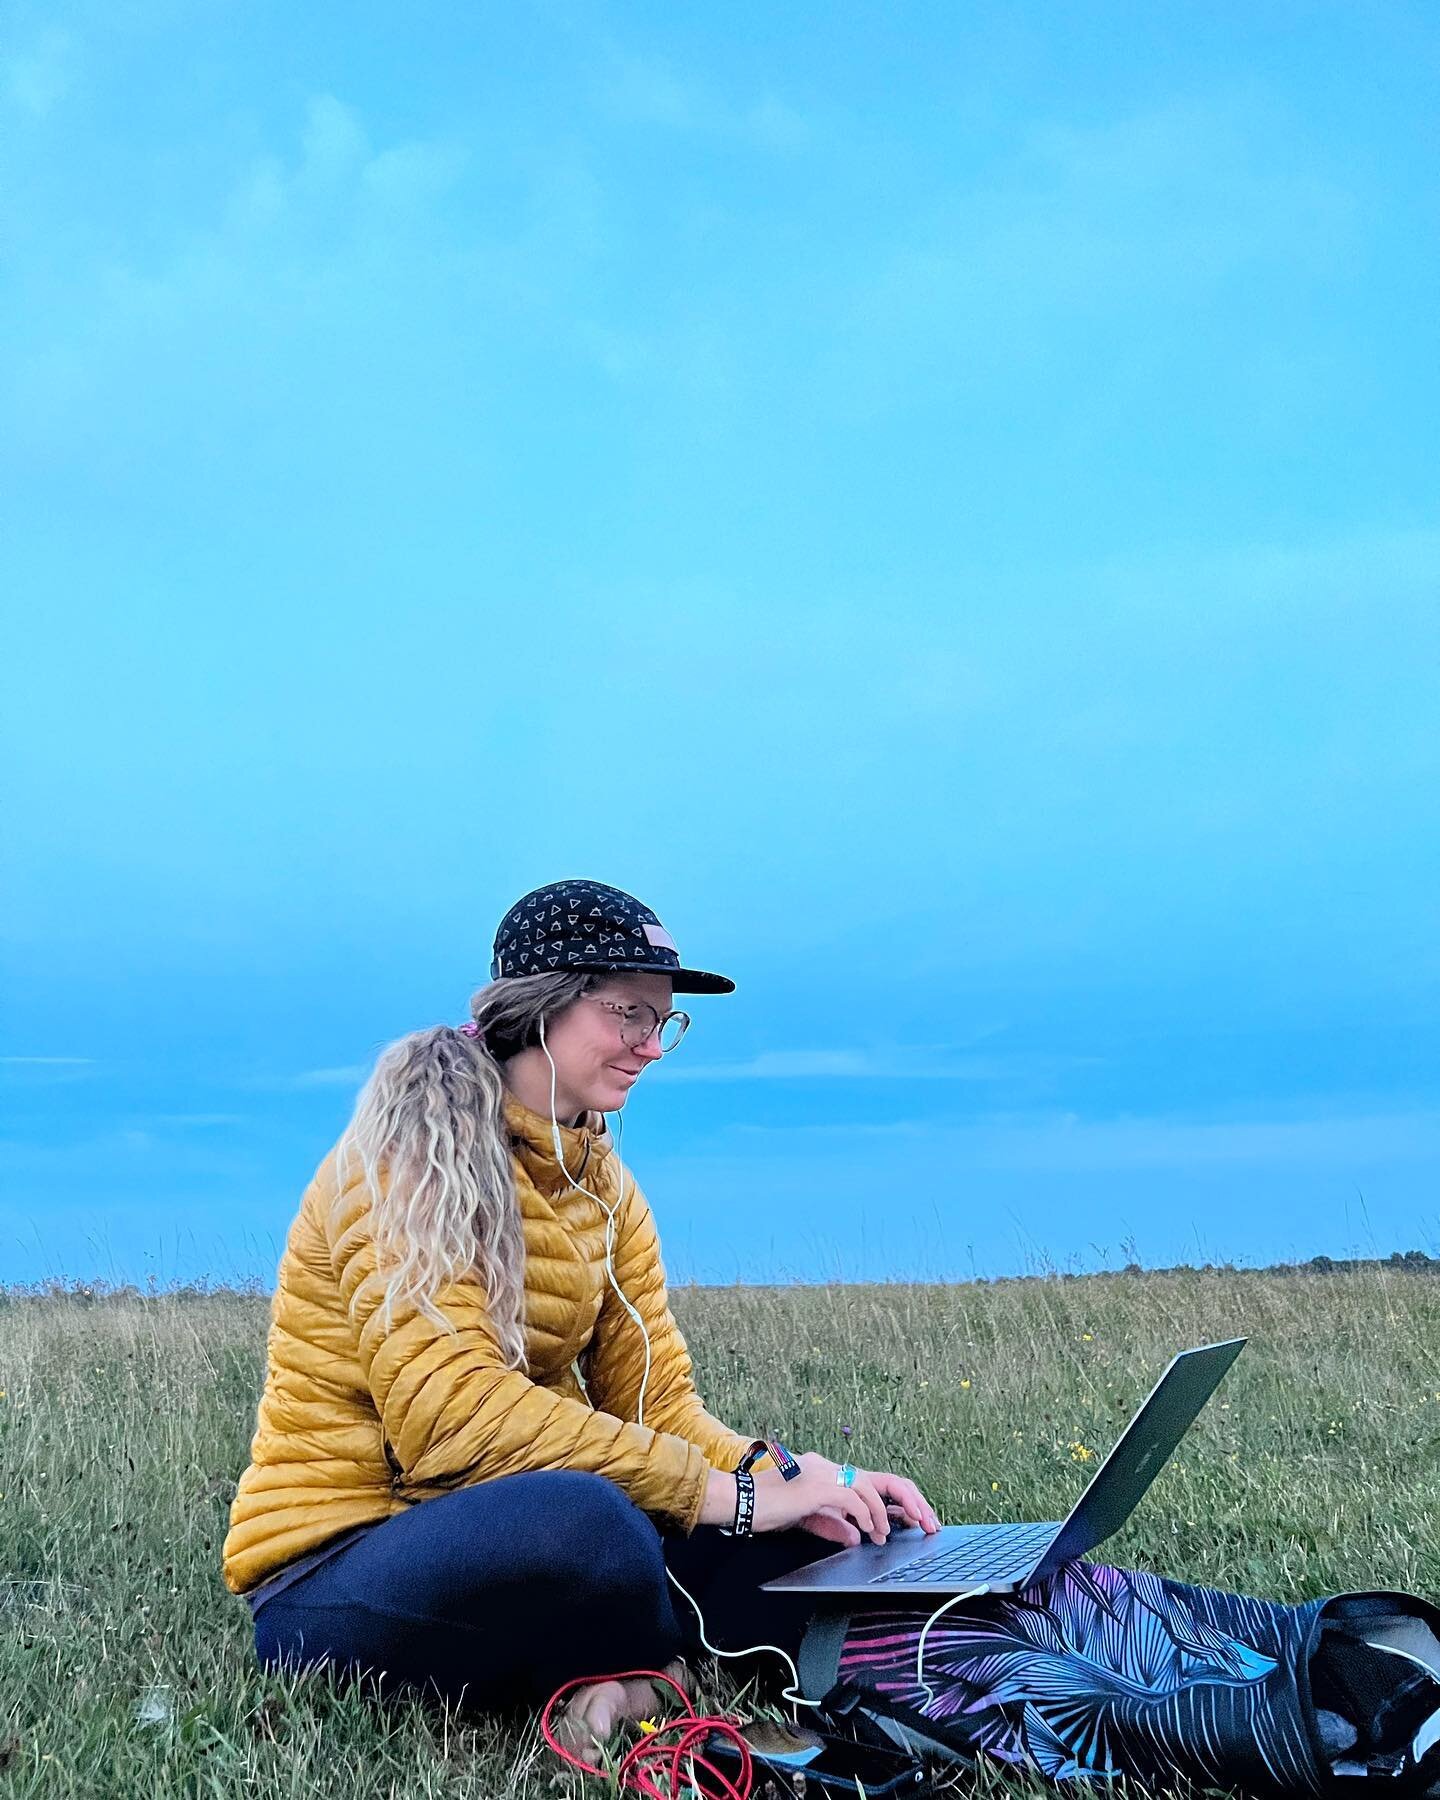 Sometimes work is magic and sometimes the magic just doesn&rsquo;t wanna work&hellip; like when you&rsquo;re trying to connect to wifi in a field in Sweden. But hey, that&rsquo;s still part of the magic ✨😉 #theviewfromtheedge #theedgecollective #edg